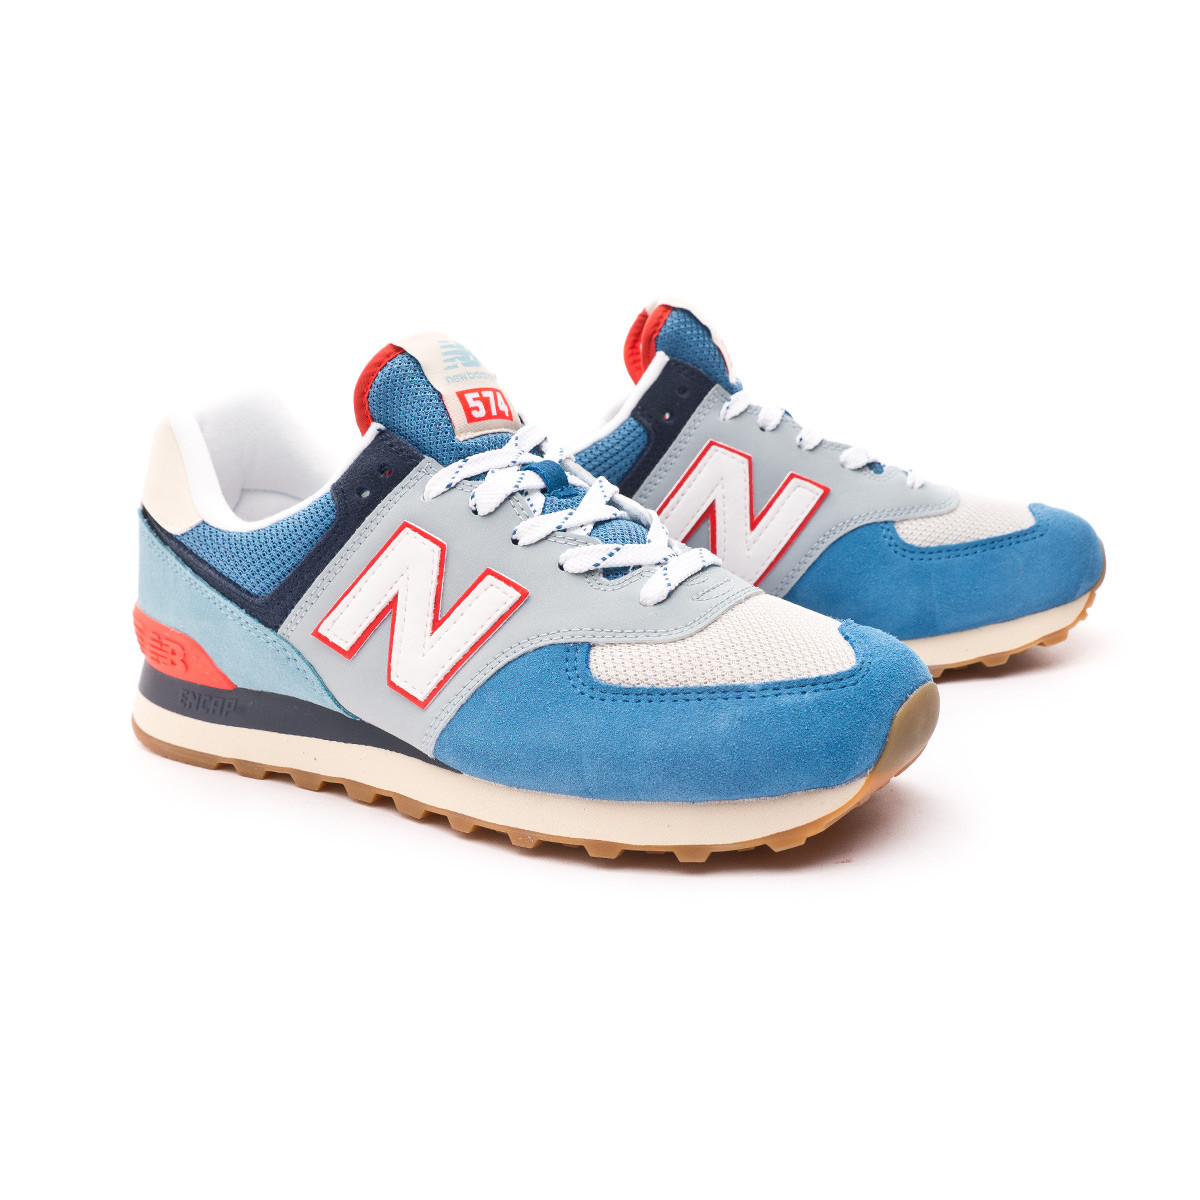 Buy new balance 574 classic homme> OFF-63%